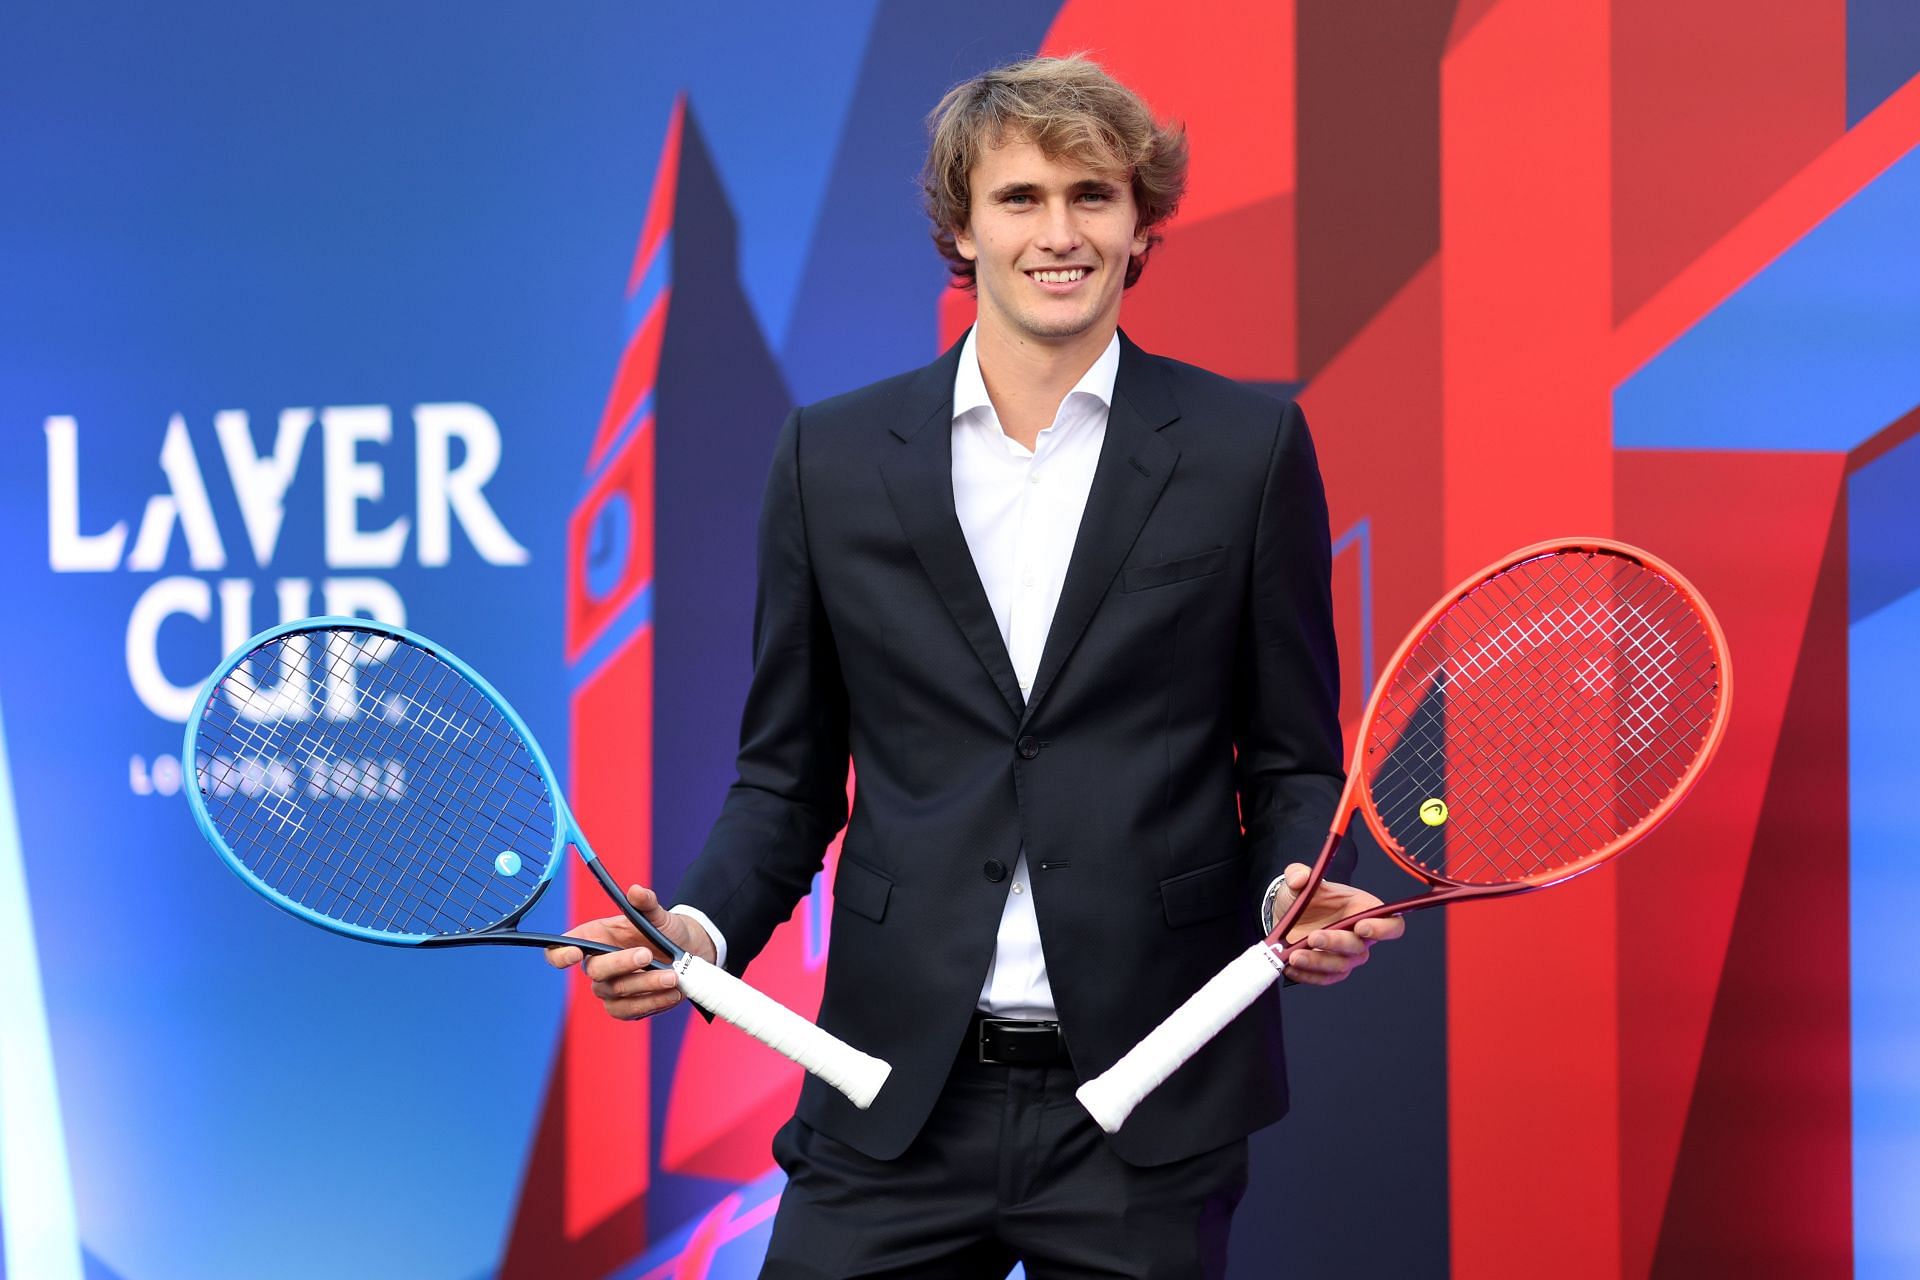 Alexander Zverev at the Laver Cup 2022